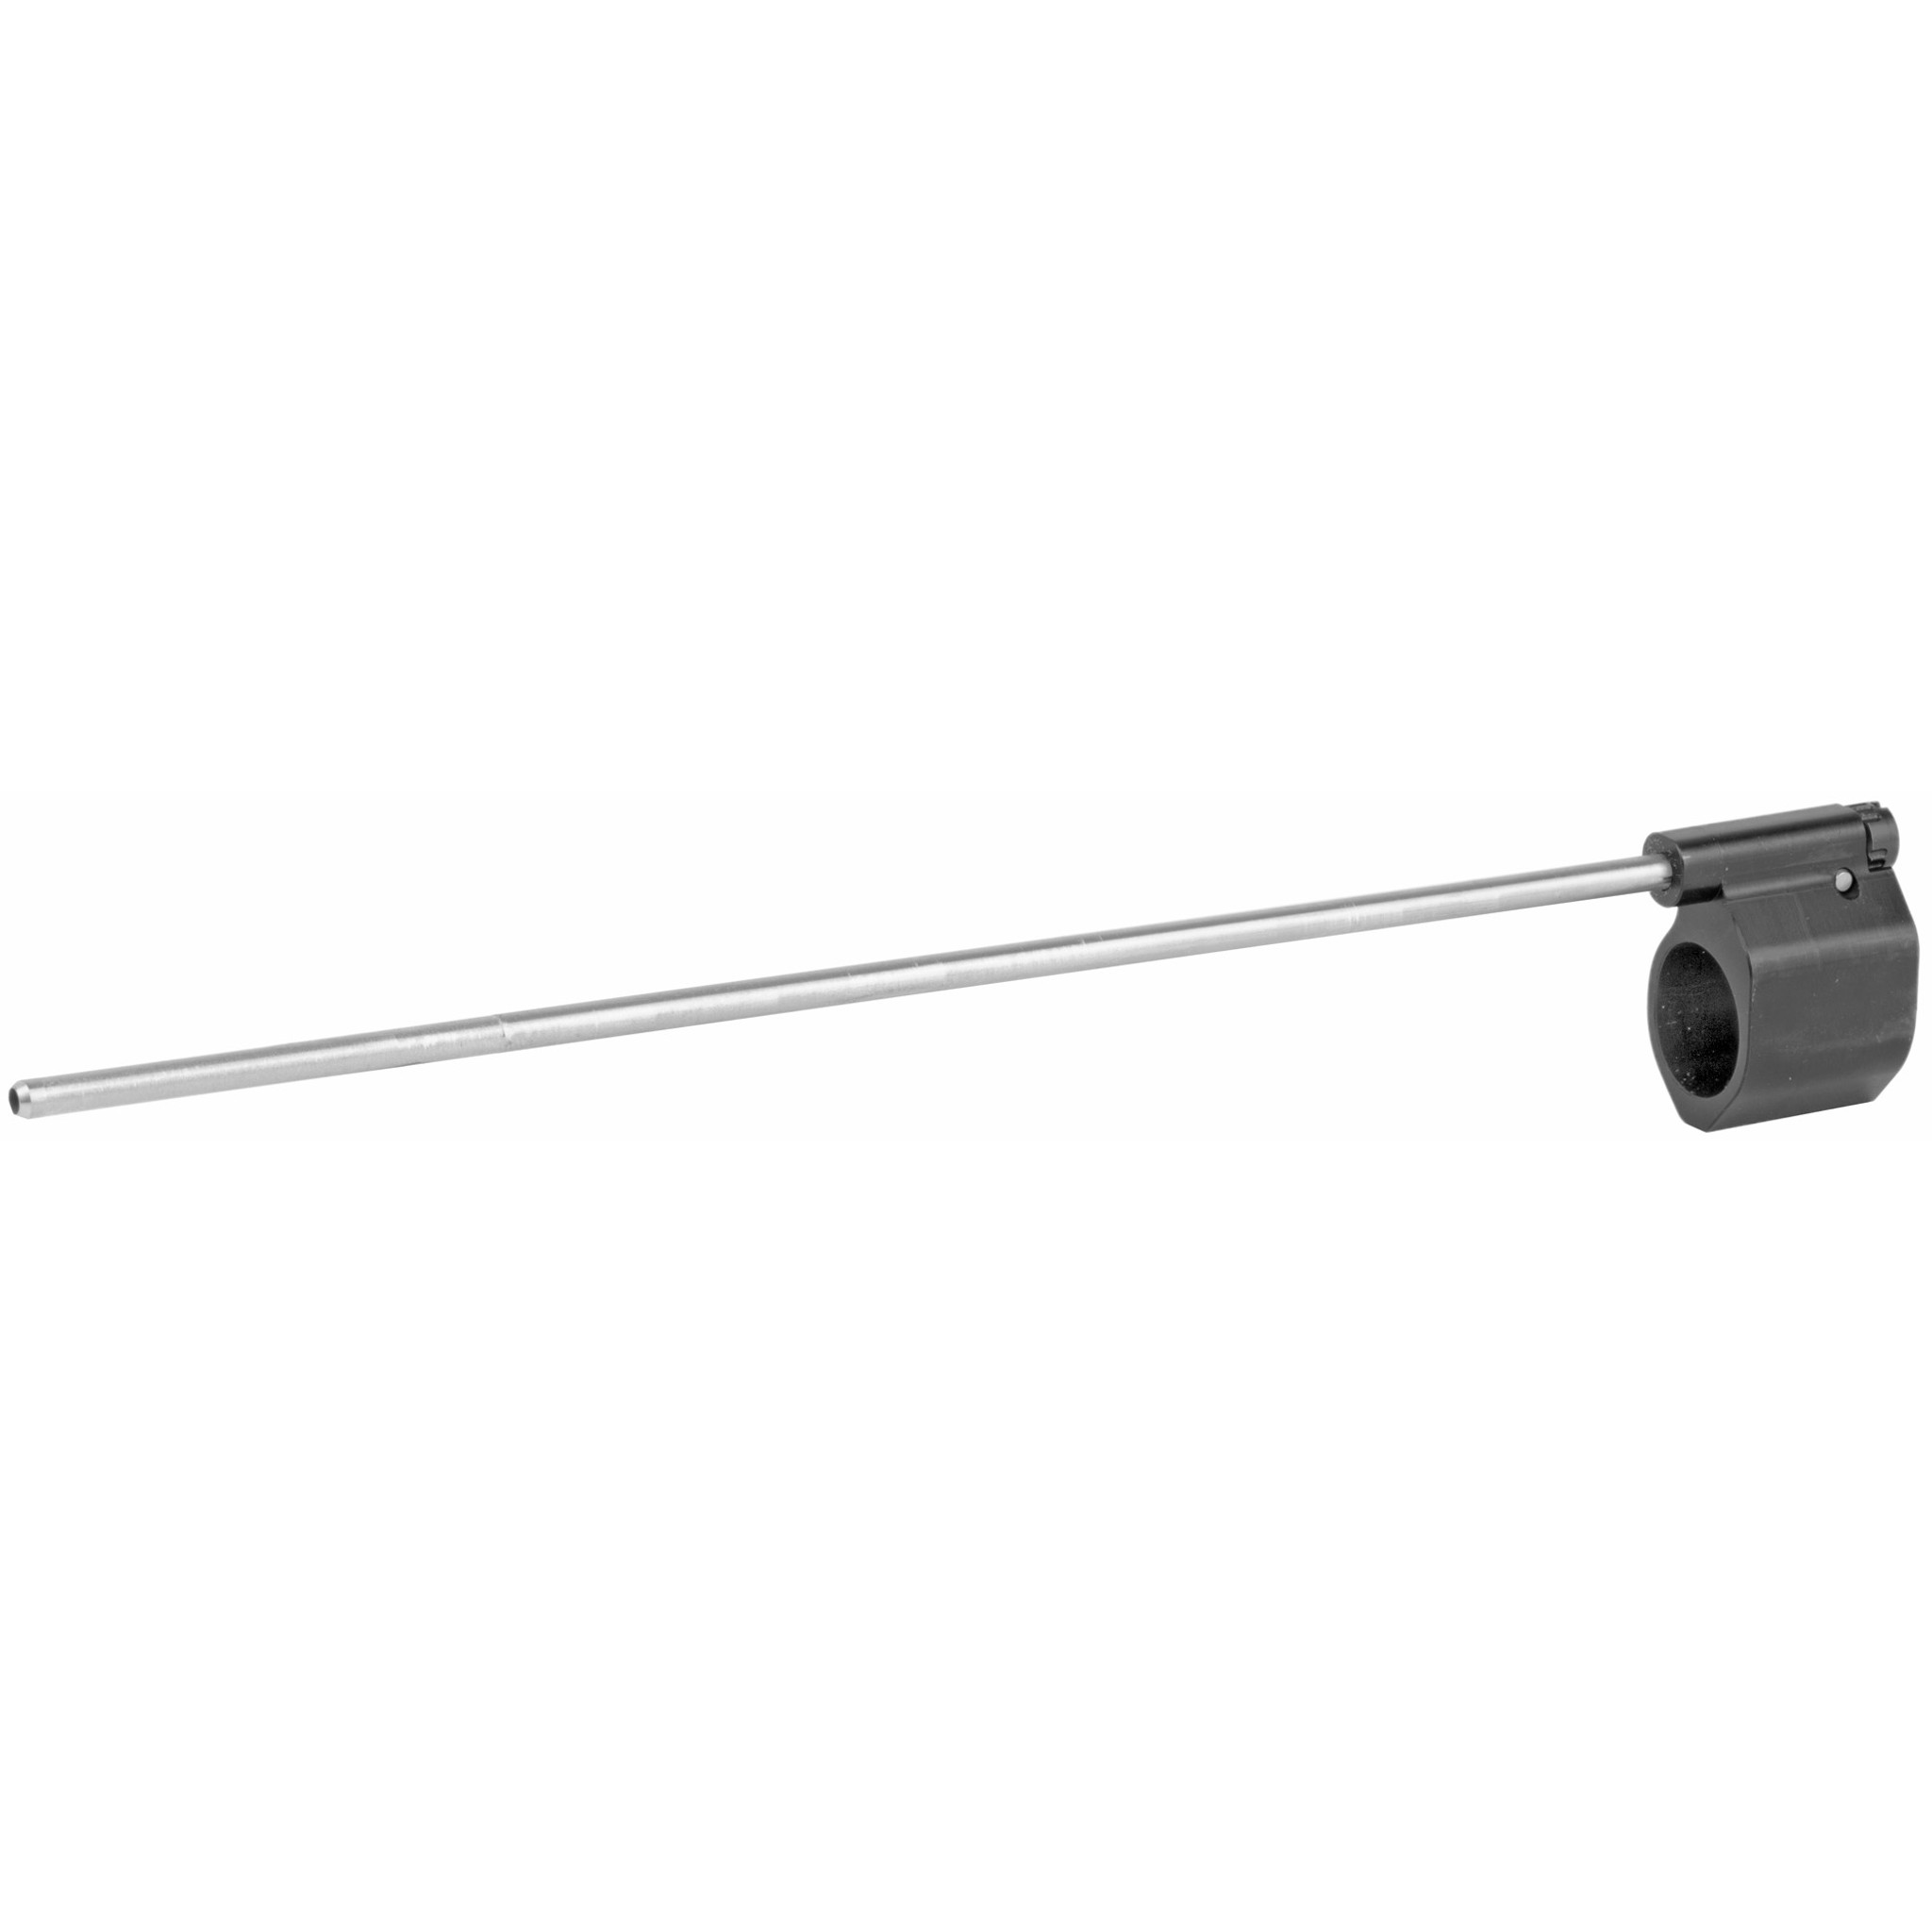  Z32278R-Clamp-Gun Simple Classic Polished Reversible